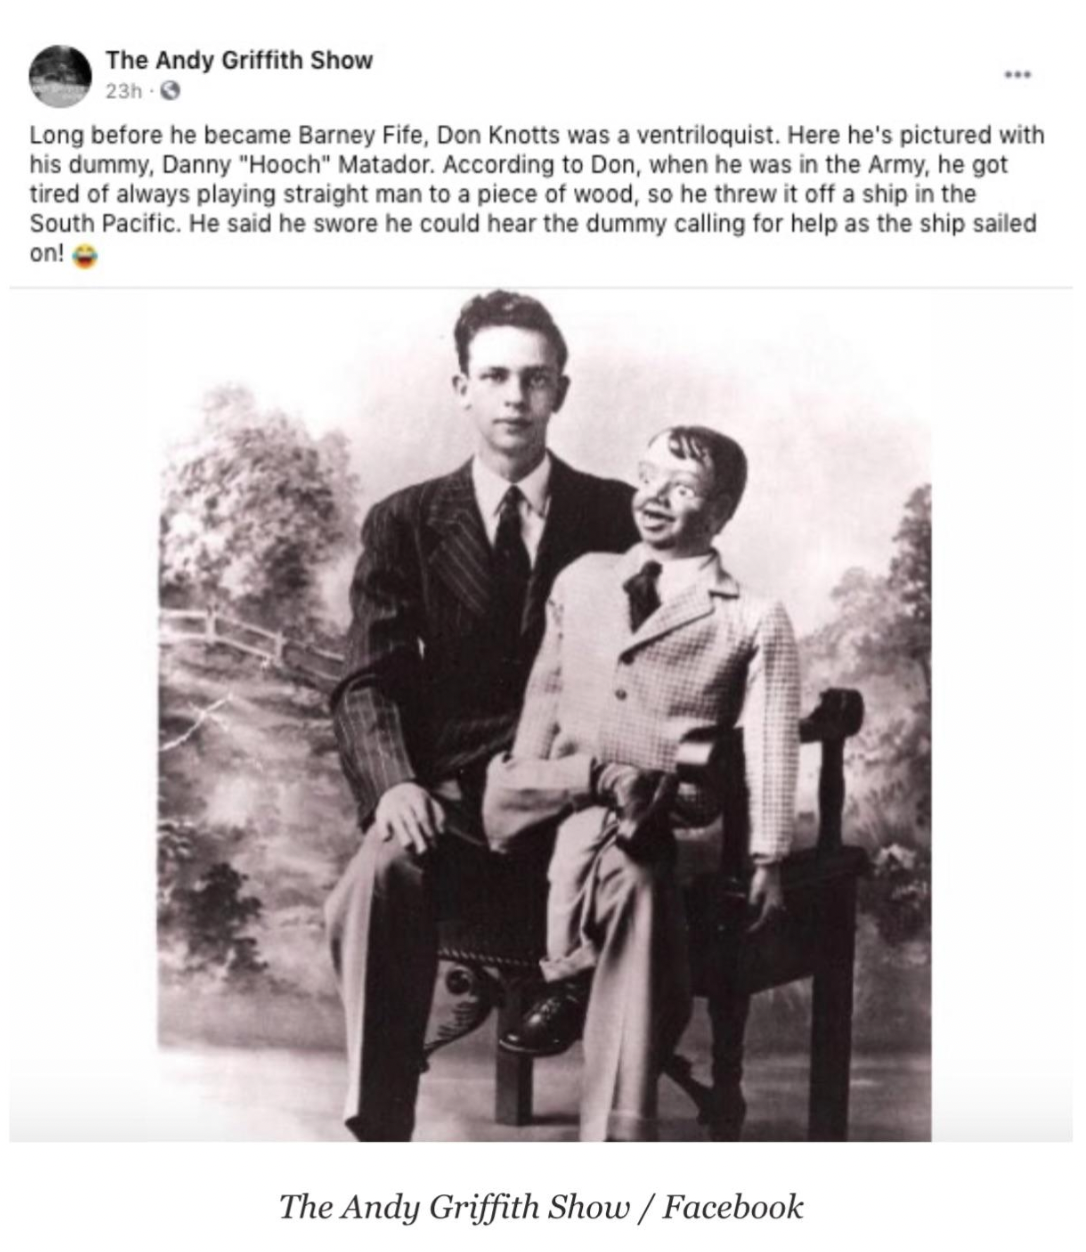 A Facebook post shows Don Knotts sitting with his dummy, Danny, on his knee